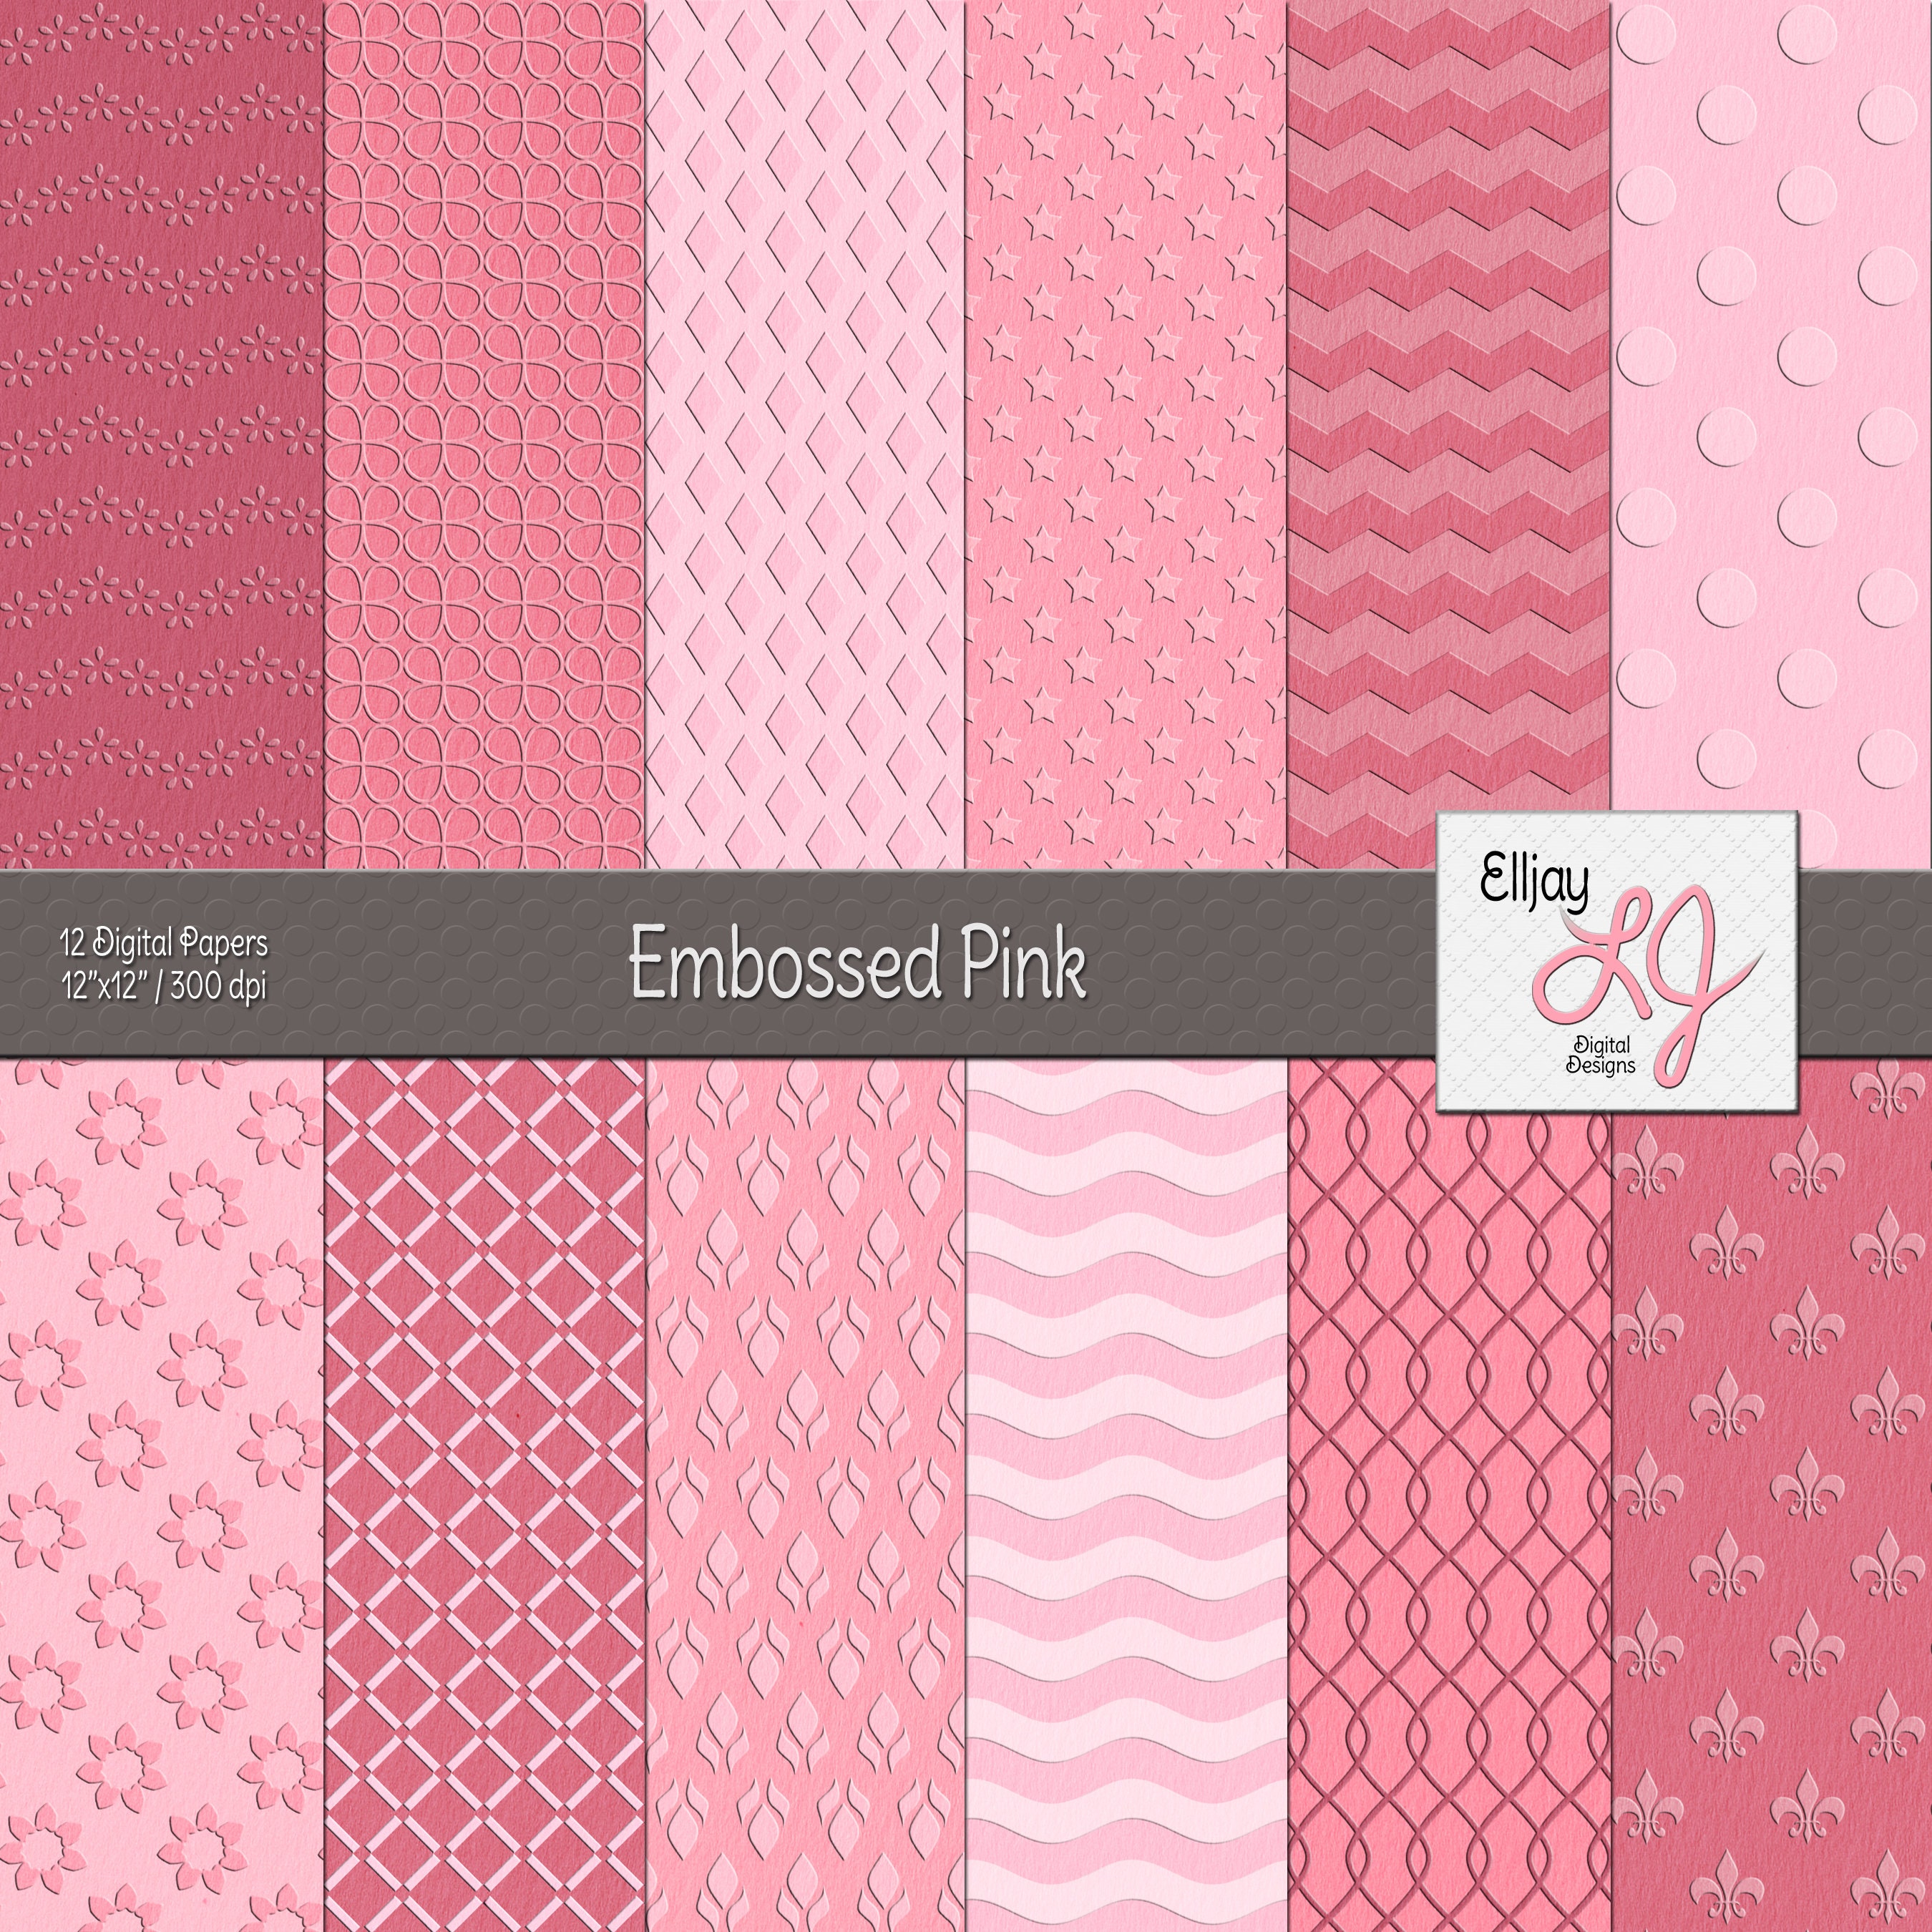  12x12 Textured Cardstock, 80 lb Carnation Pink Scrapbook Paper, Premium Card Making and Paper Crafting Supplies